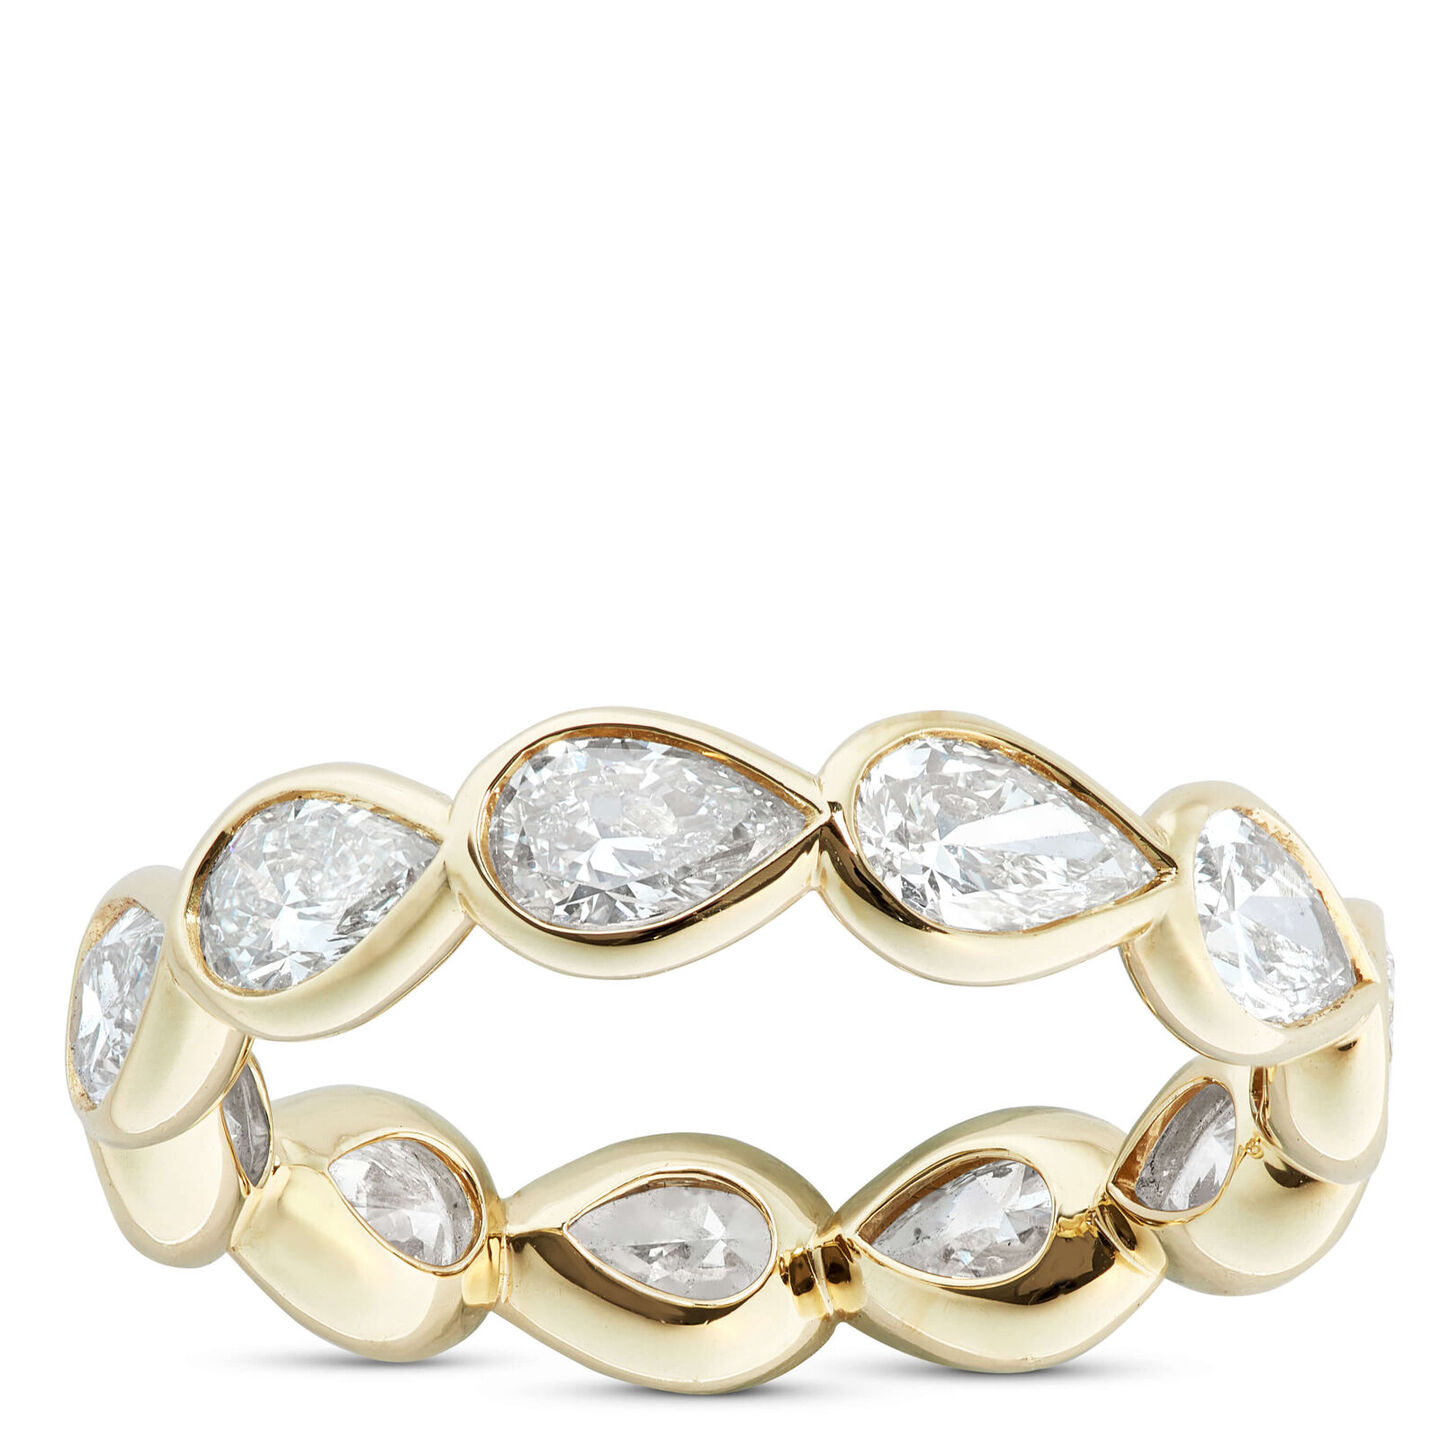 Pear shaped diamond ring in 14k yellow gold with a white background